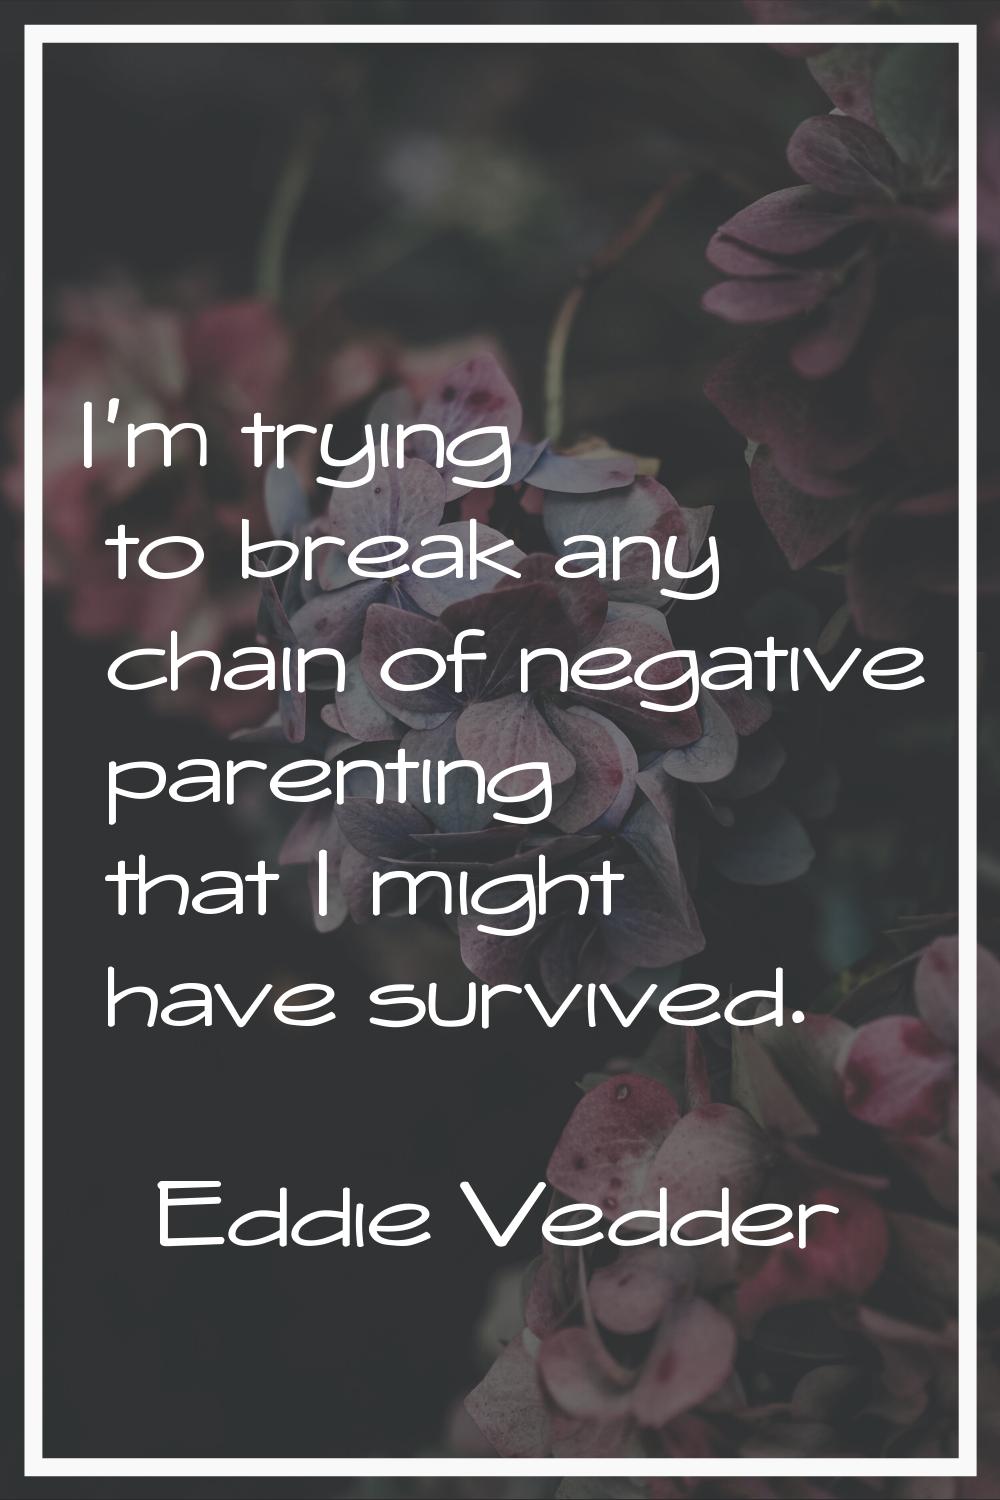 I'm trying to break any chain of negative parenting that I might have survived.